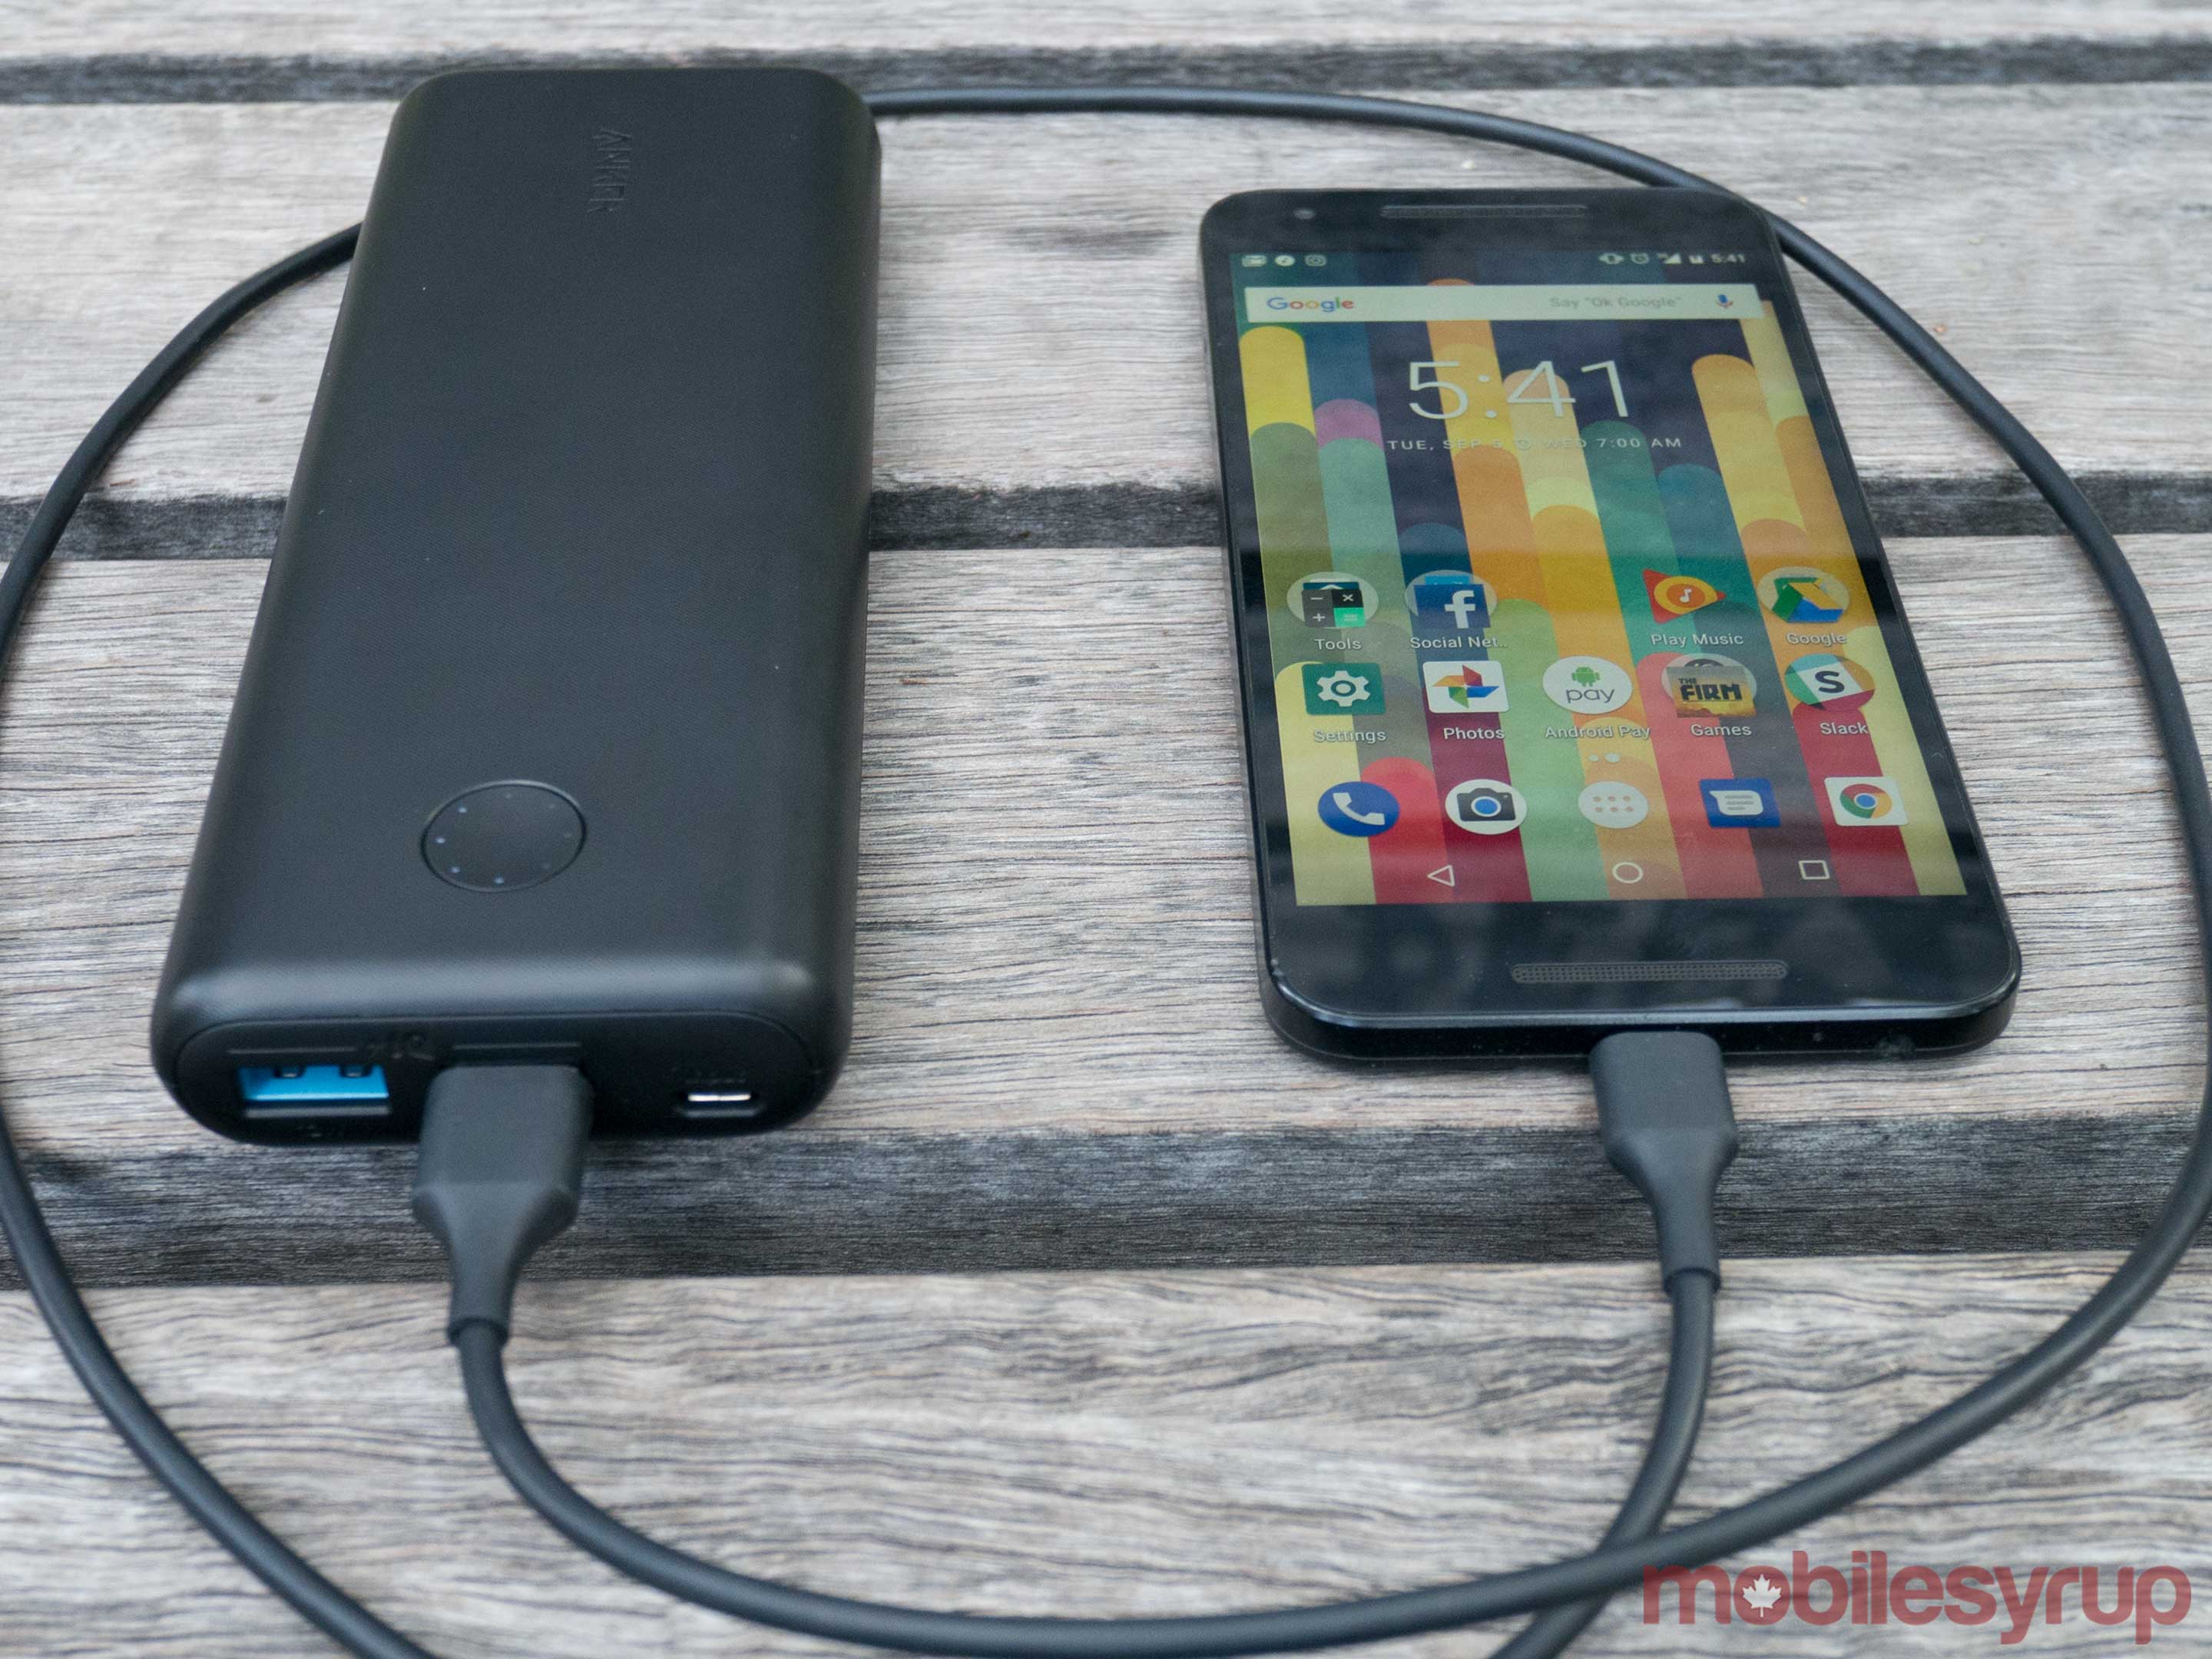 A Nexus 5X plugged into the Anker PowerCore II